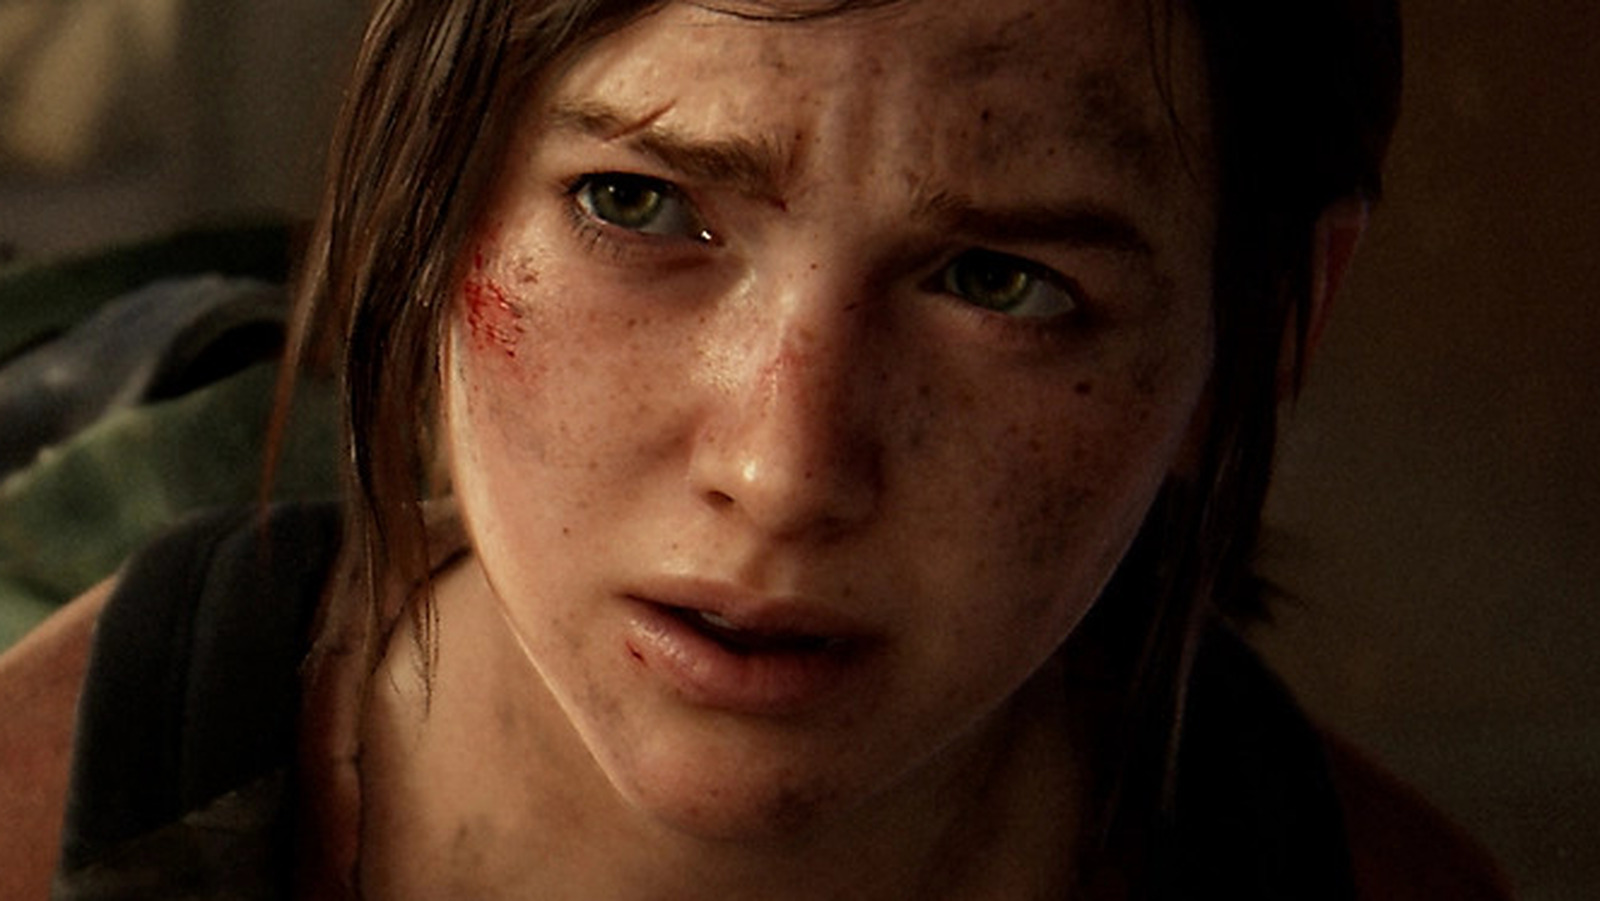 The Last Of Us Part 1 PS5 Review: A Fine But Unnecessary Remake